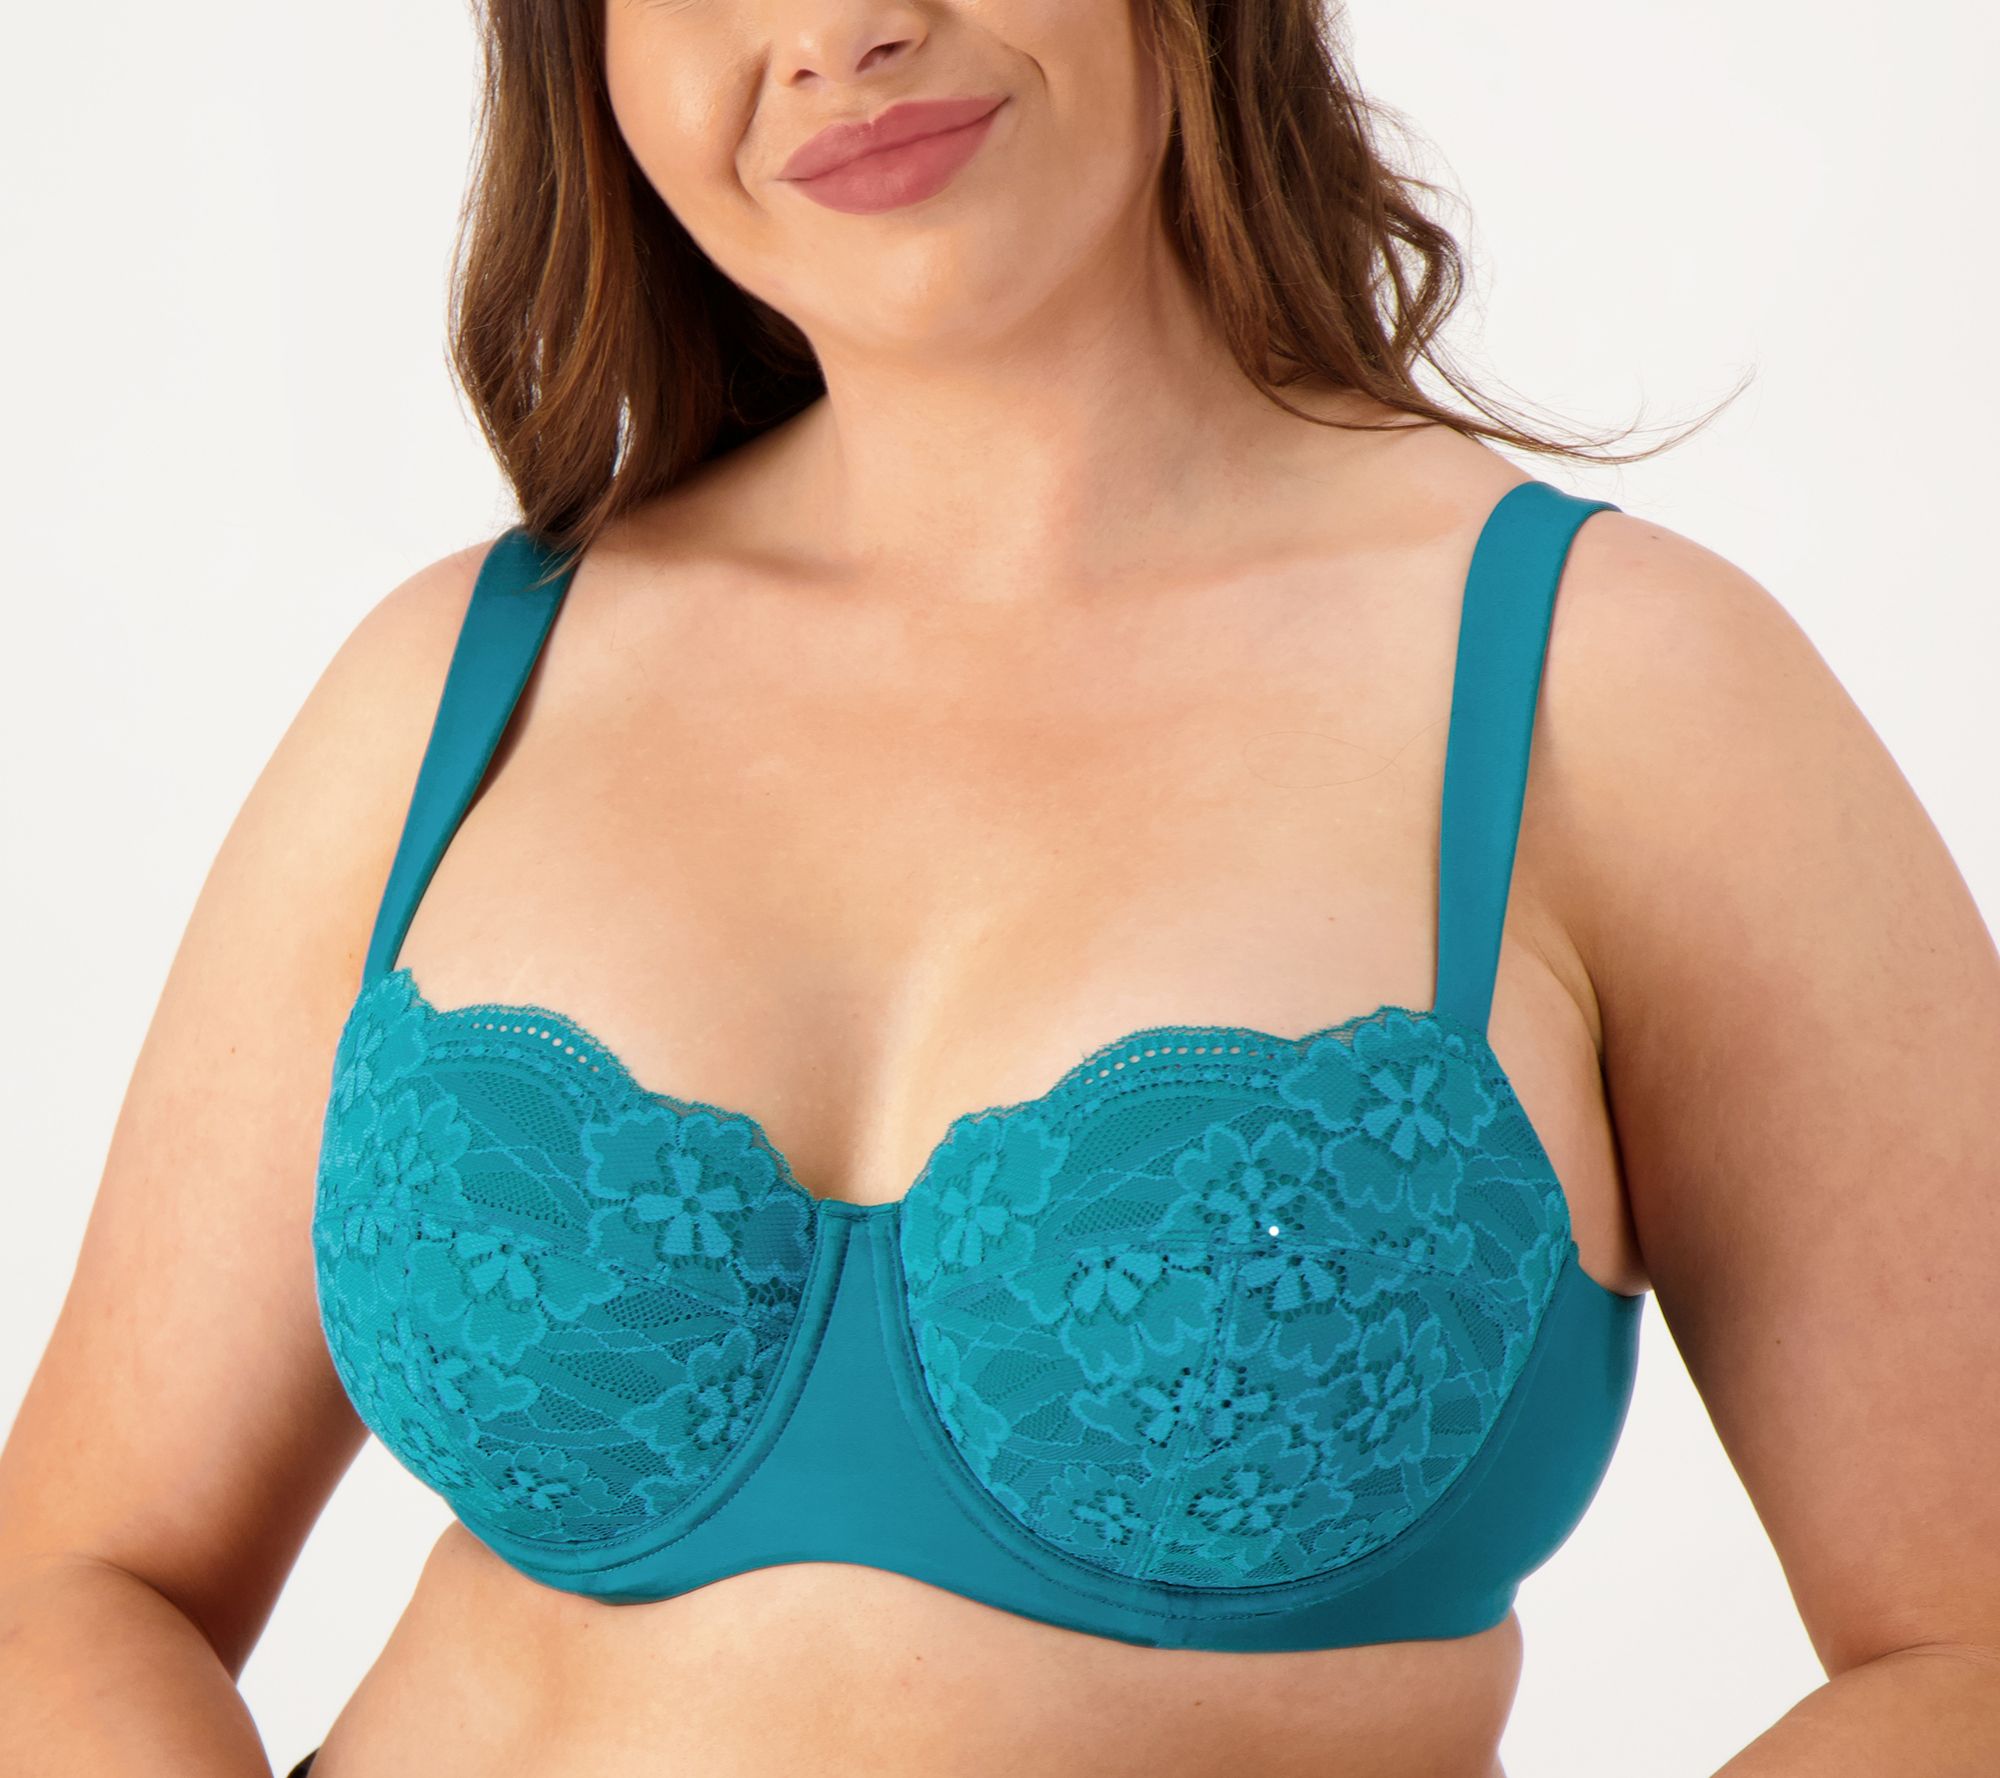 Breezies Lace Effects Full Coverage Seamless Underwire Bra - QVC.com